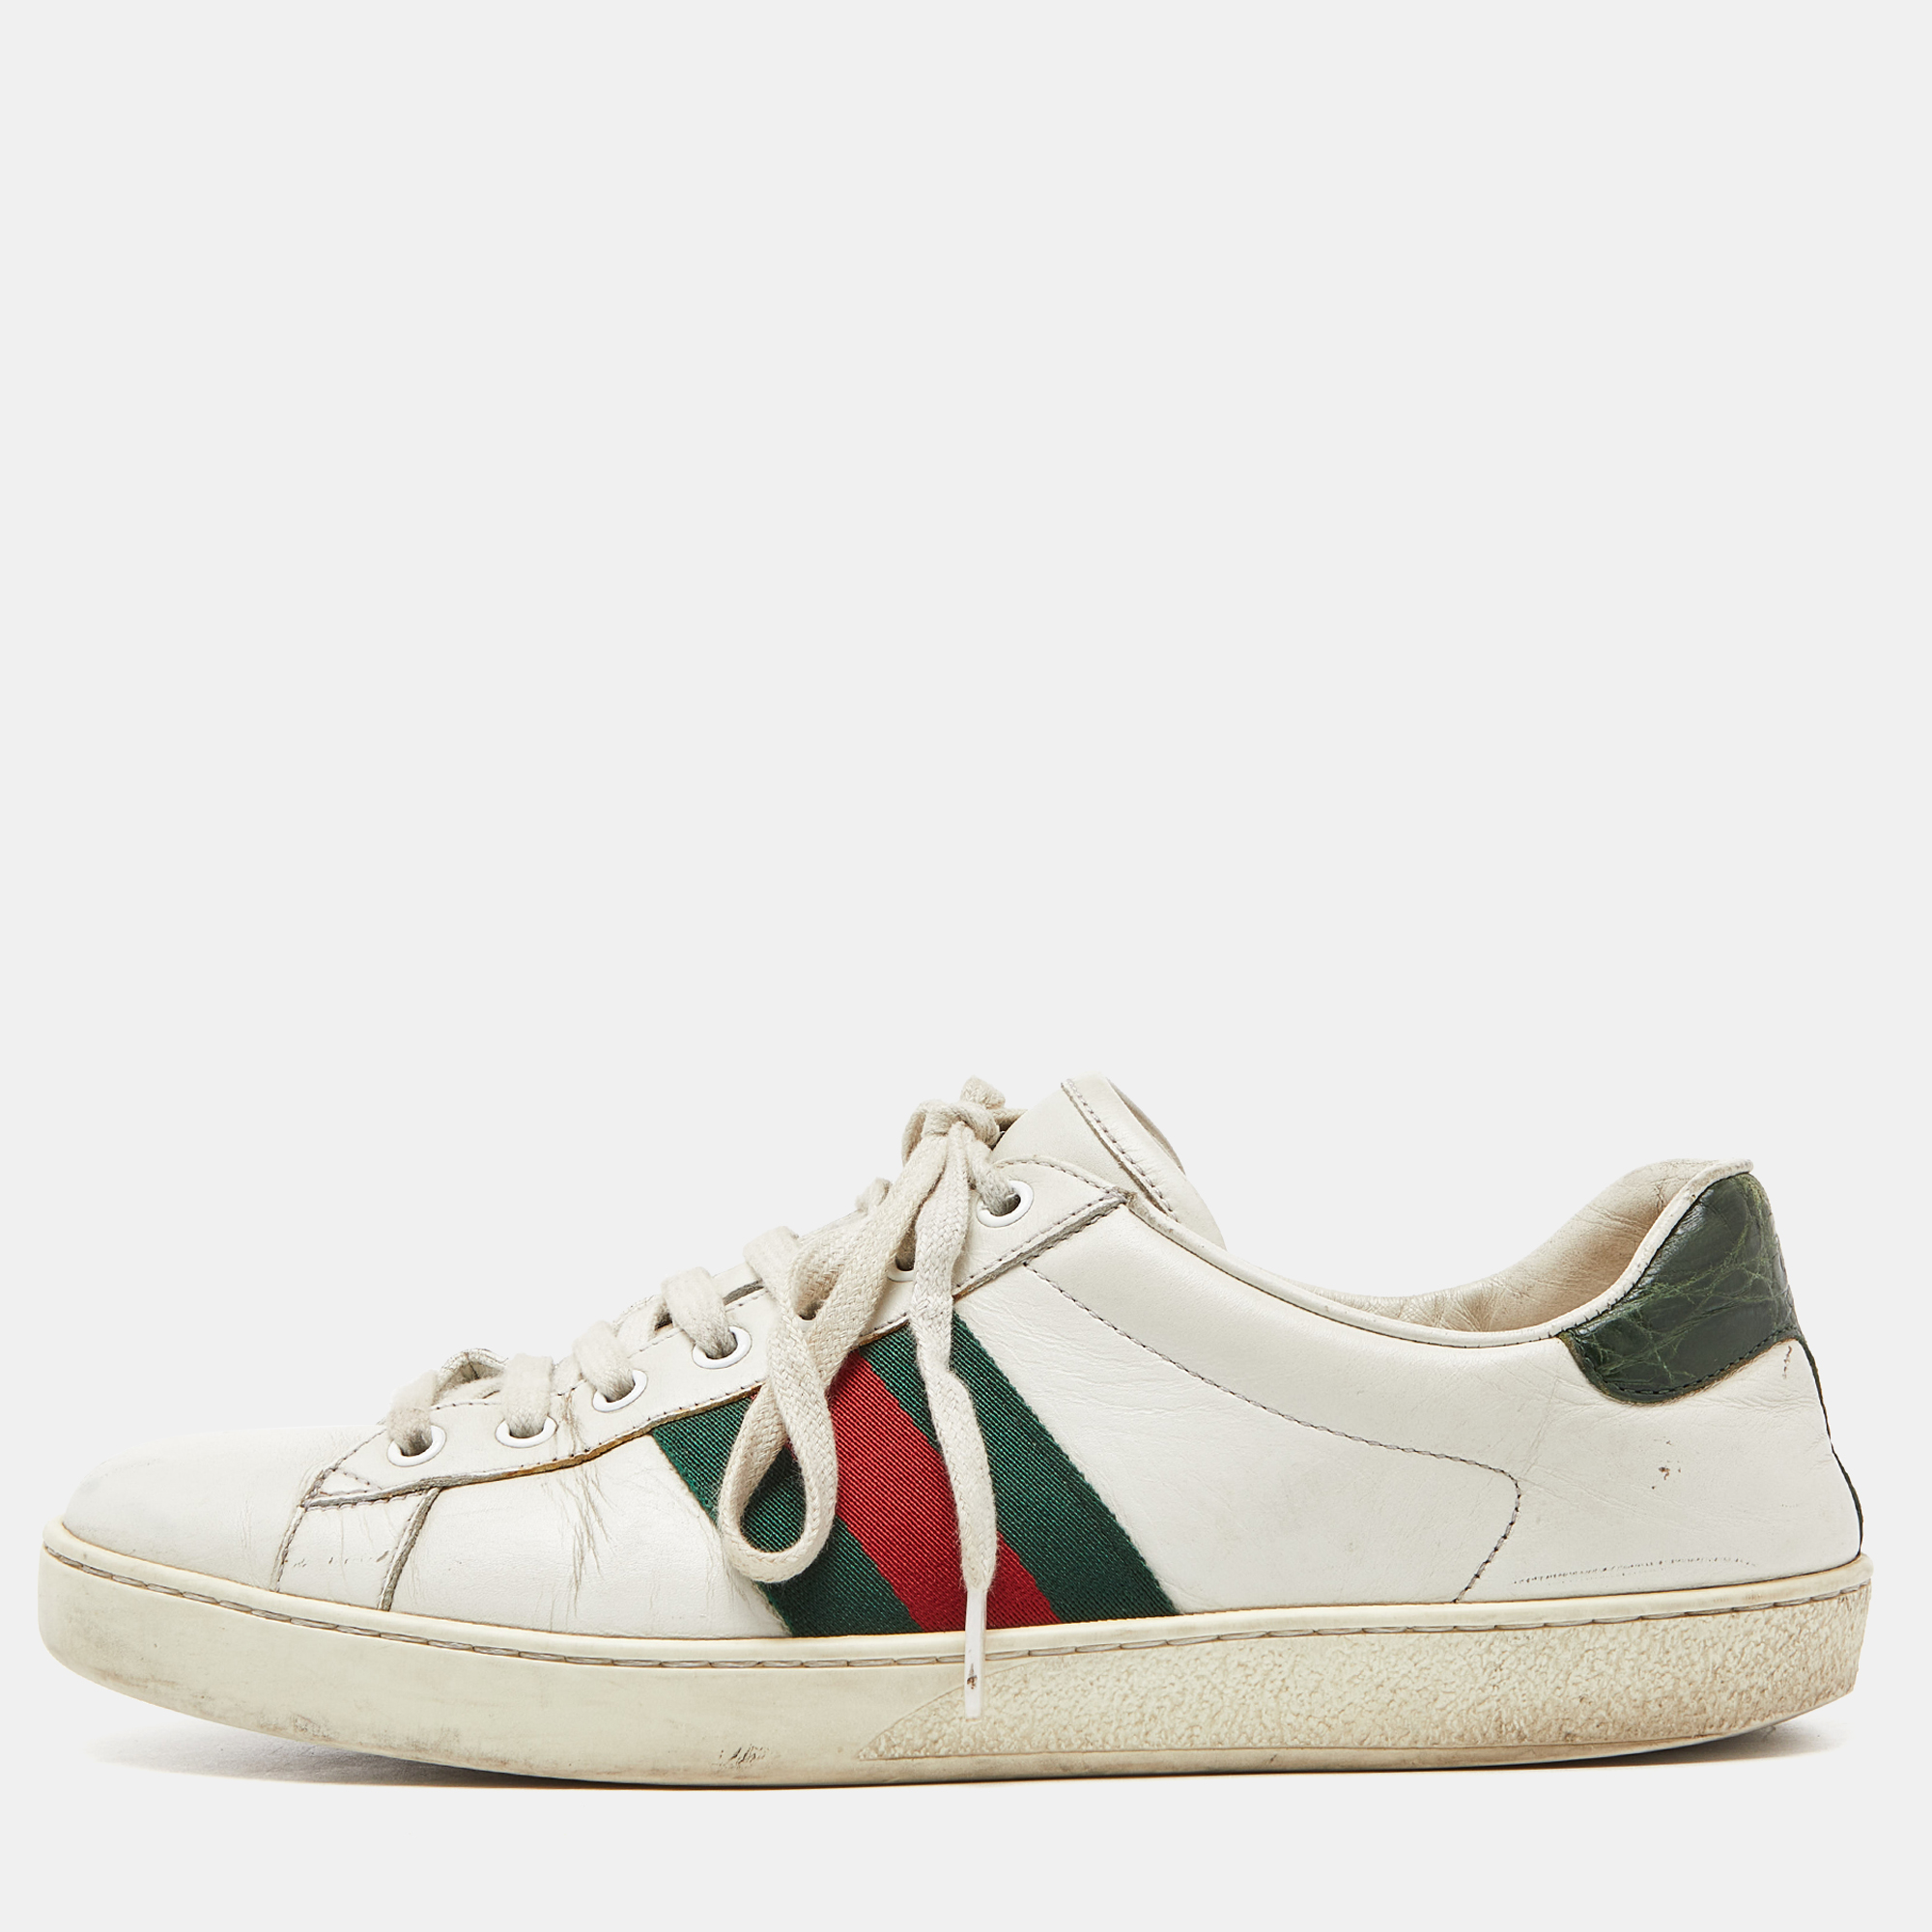 Gucci white leather web ace low top sneakers size 42.5